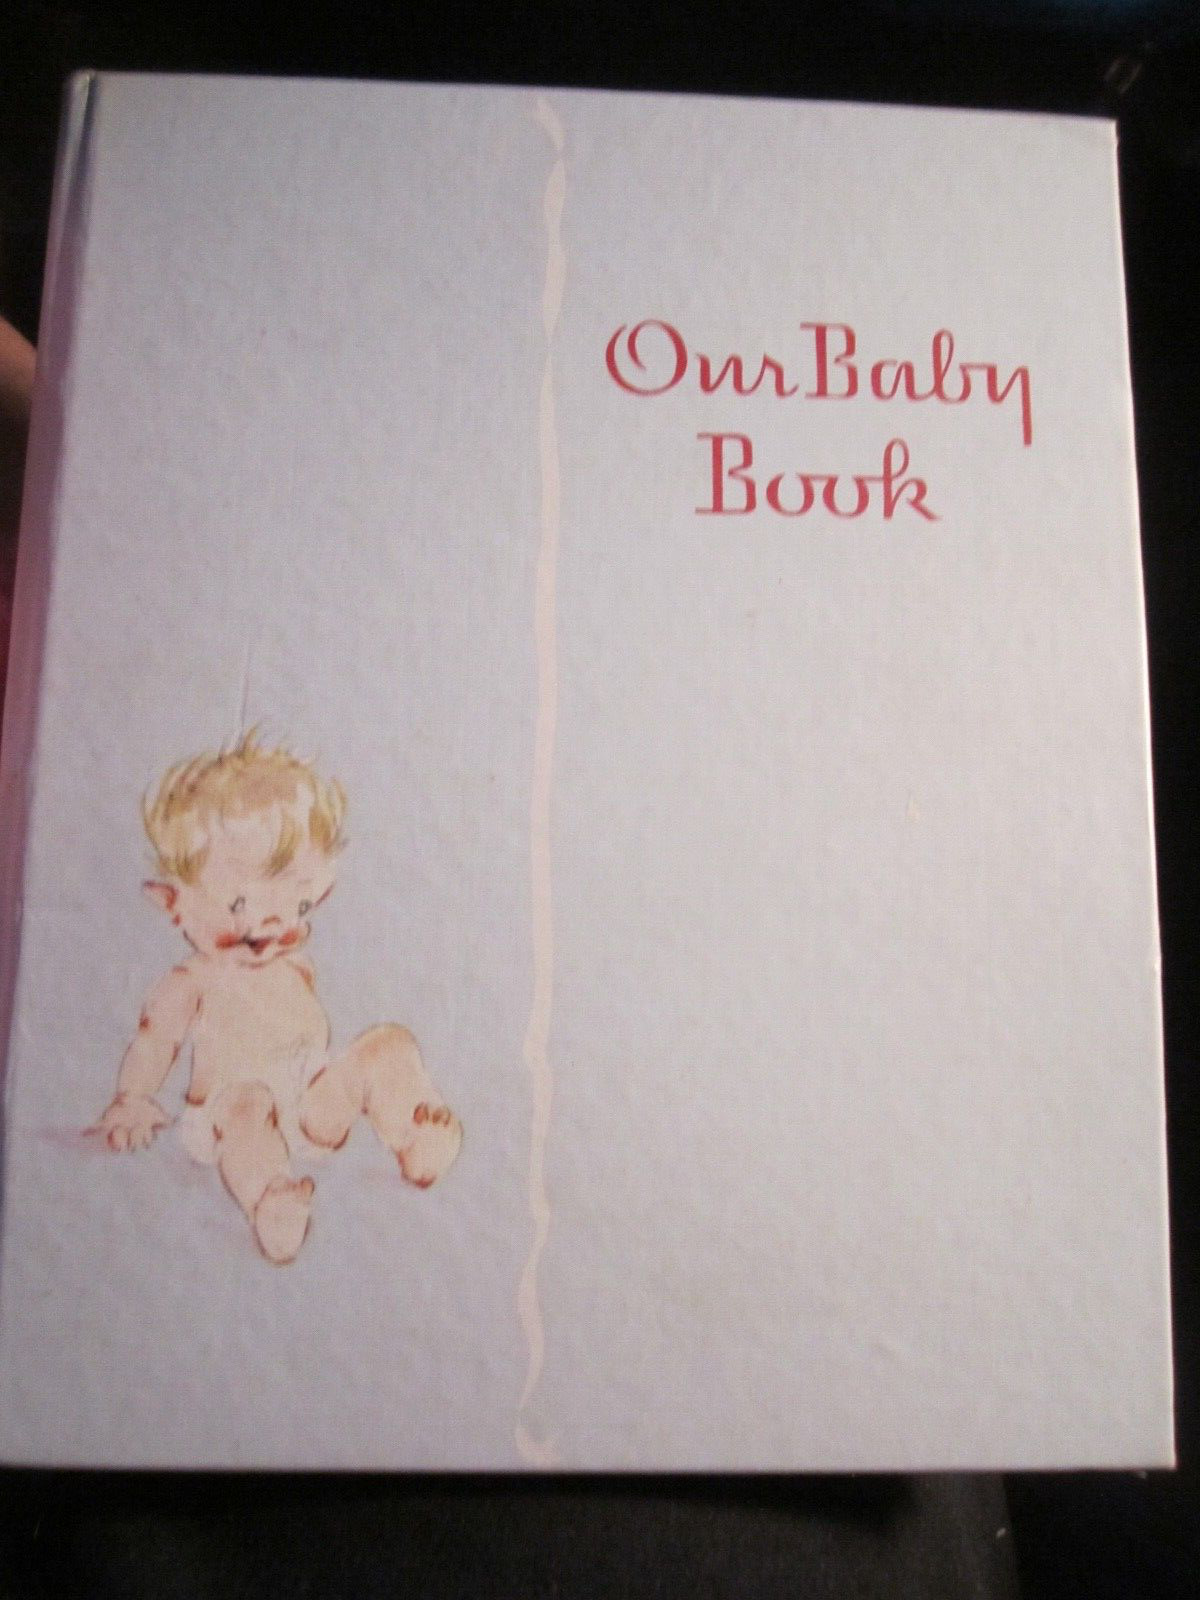 VINTAGE BABY BOOK FOR YOUR NEWLY BORN BABY - FANTASTIC GRAPHICS UNUSED - BBA-50